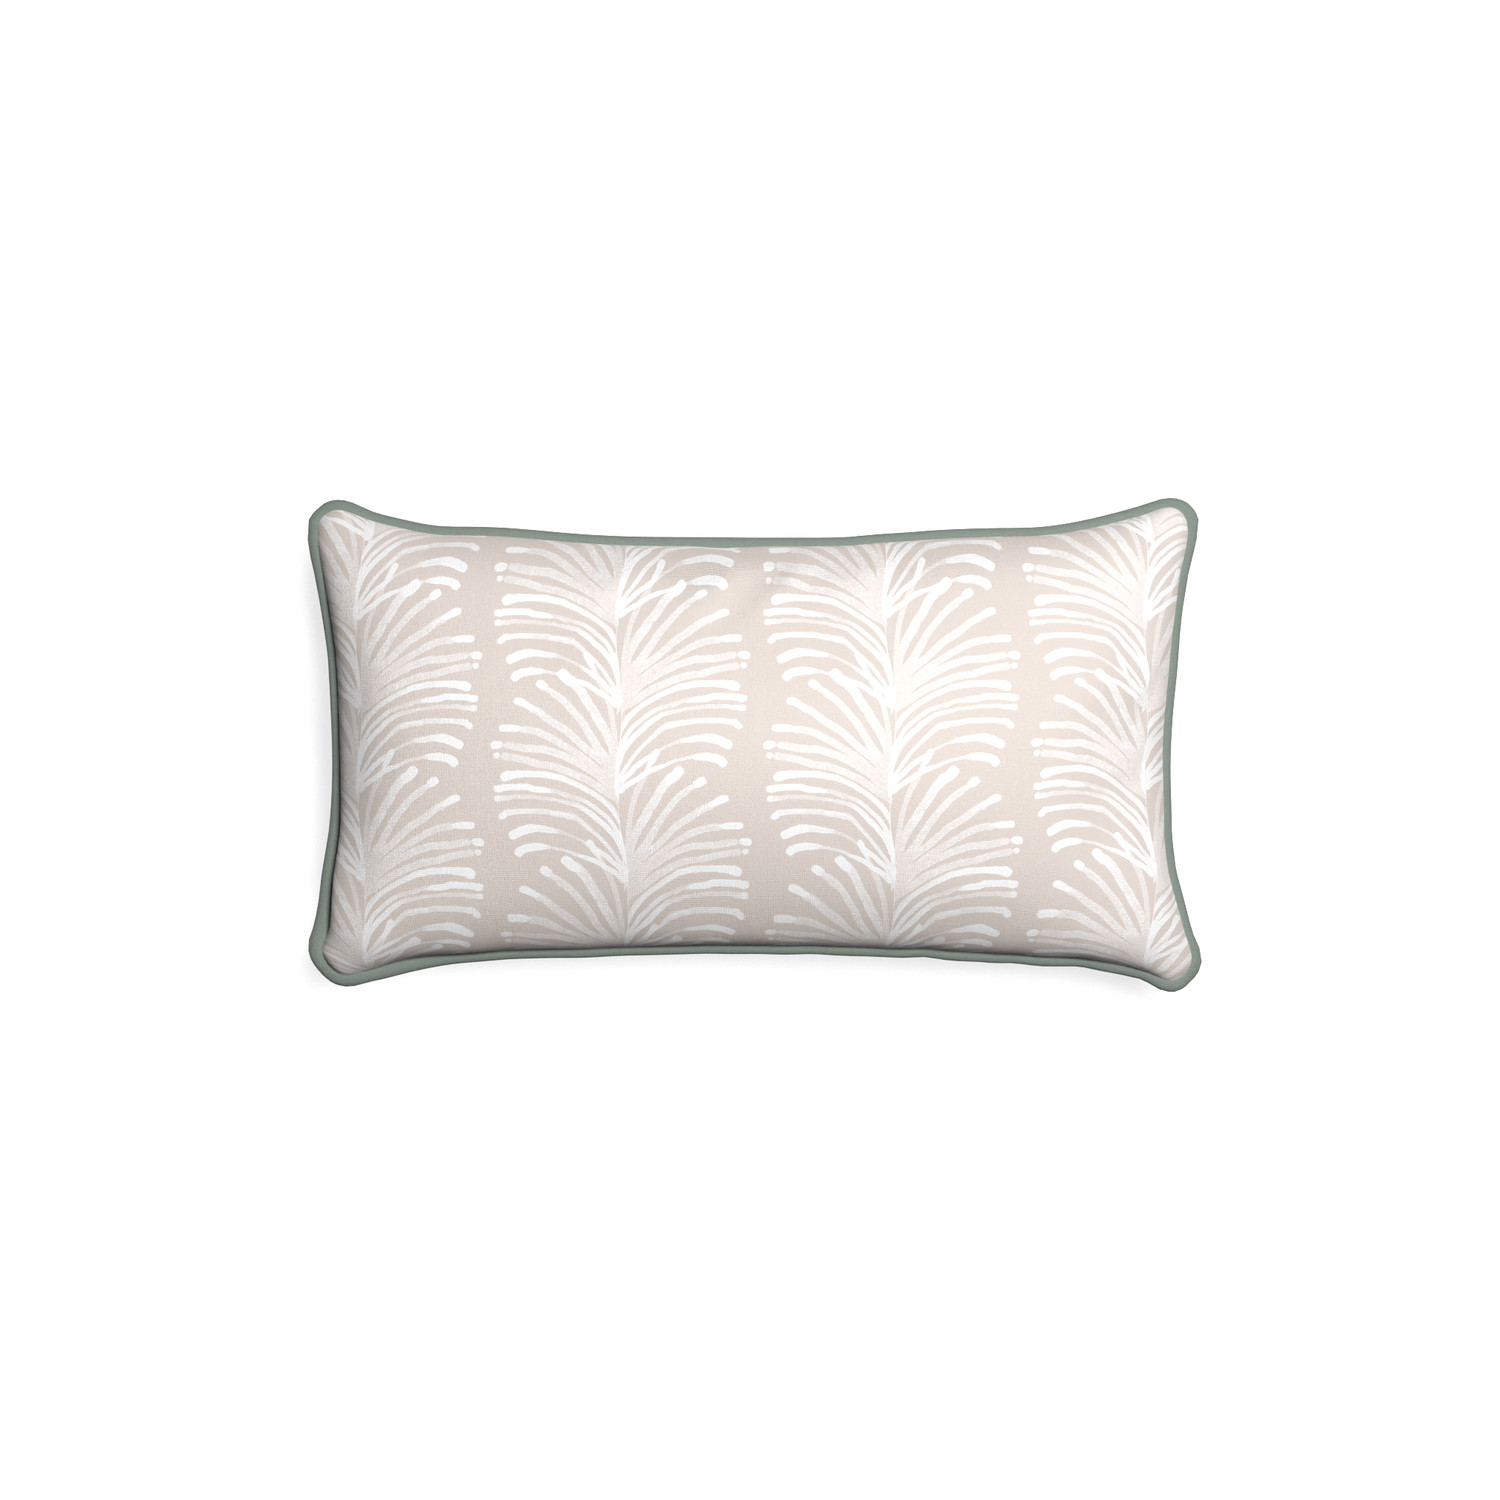 Petite-lumbar emma sand custom sand colored botanical stripepillow with sage piping on white background